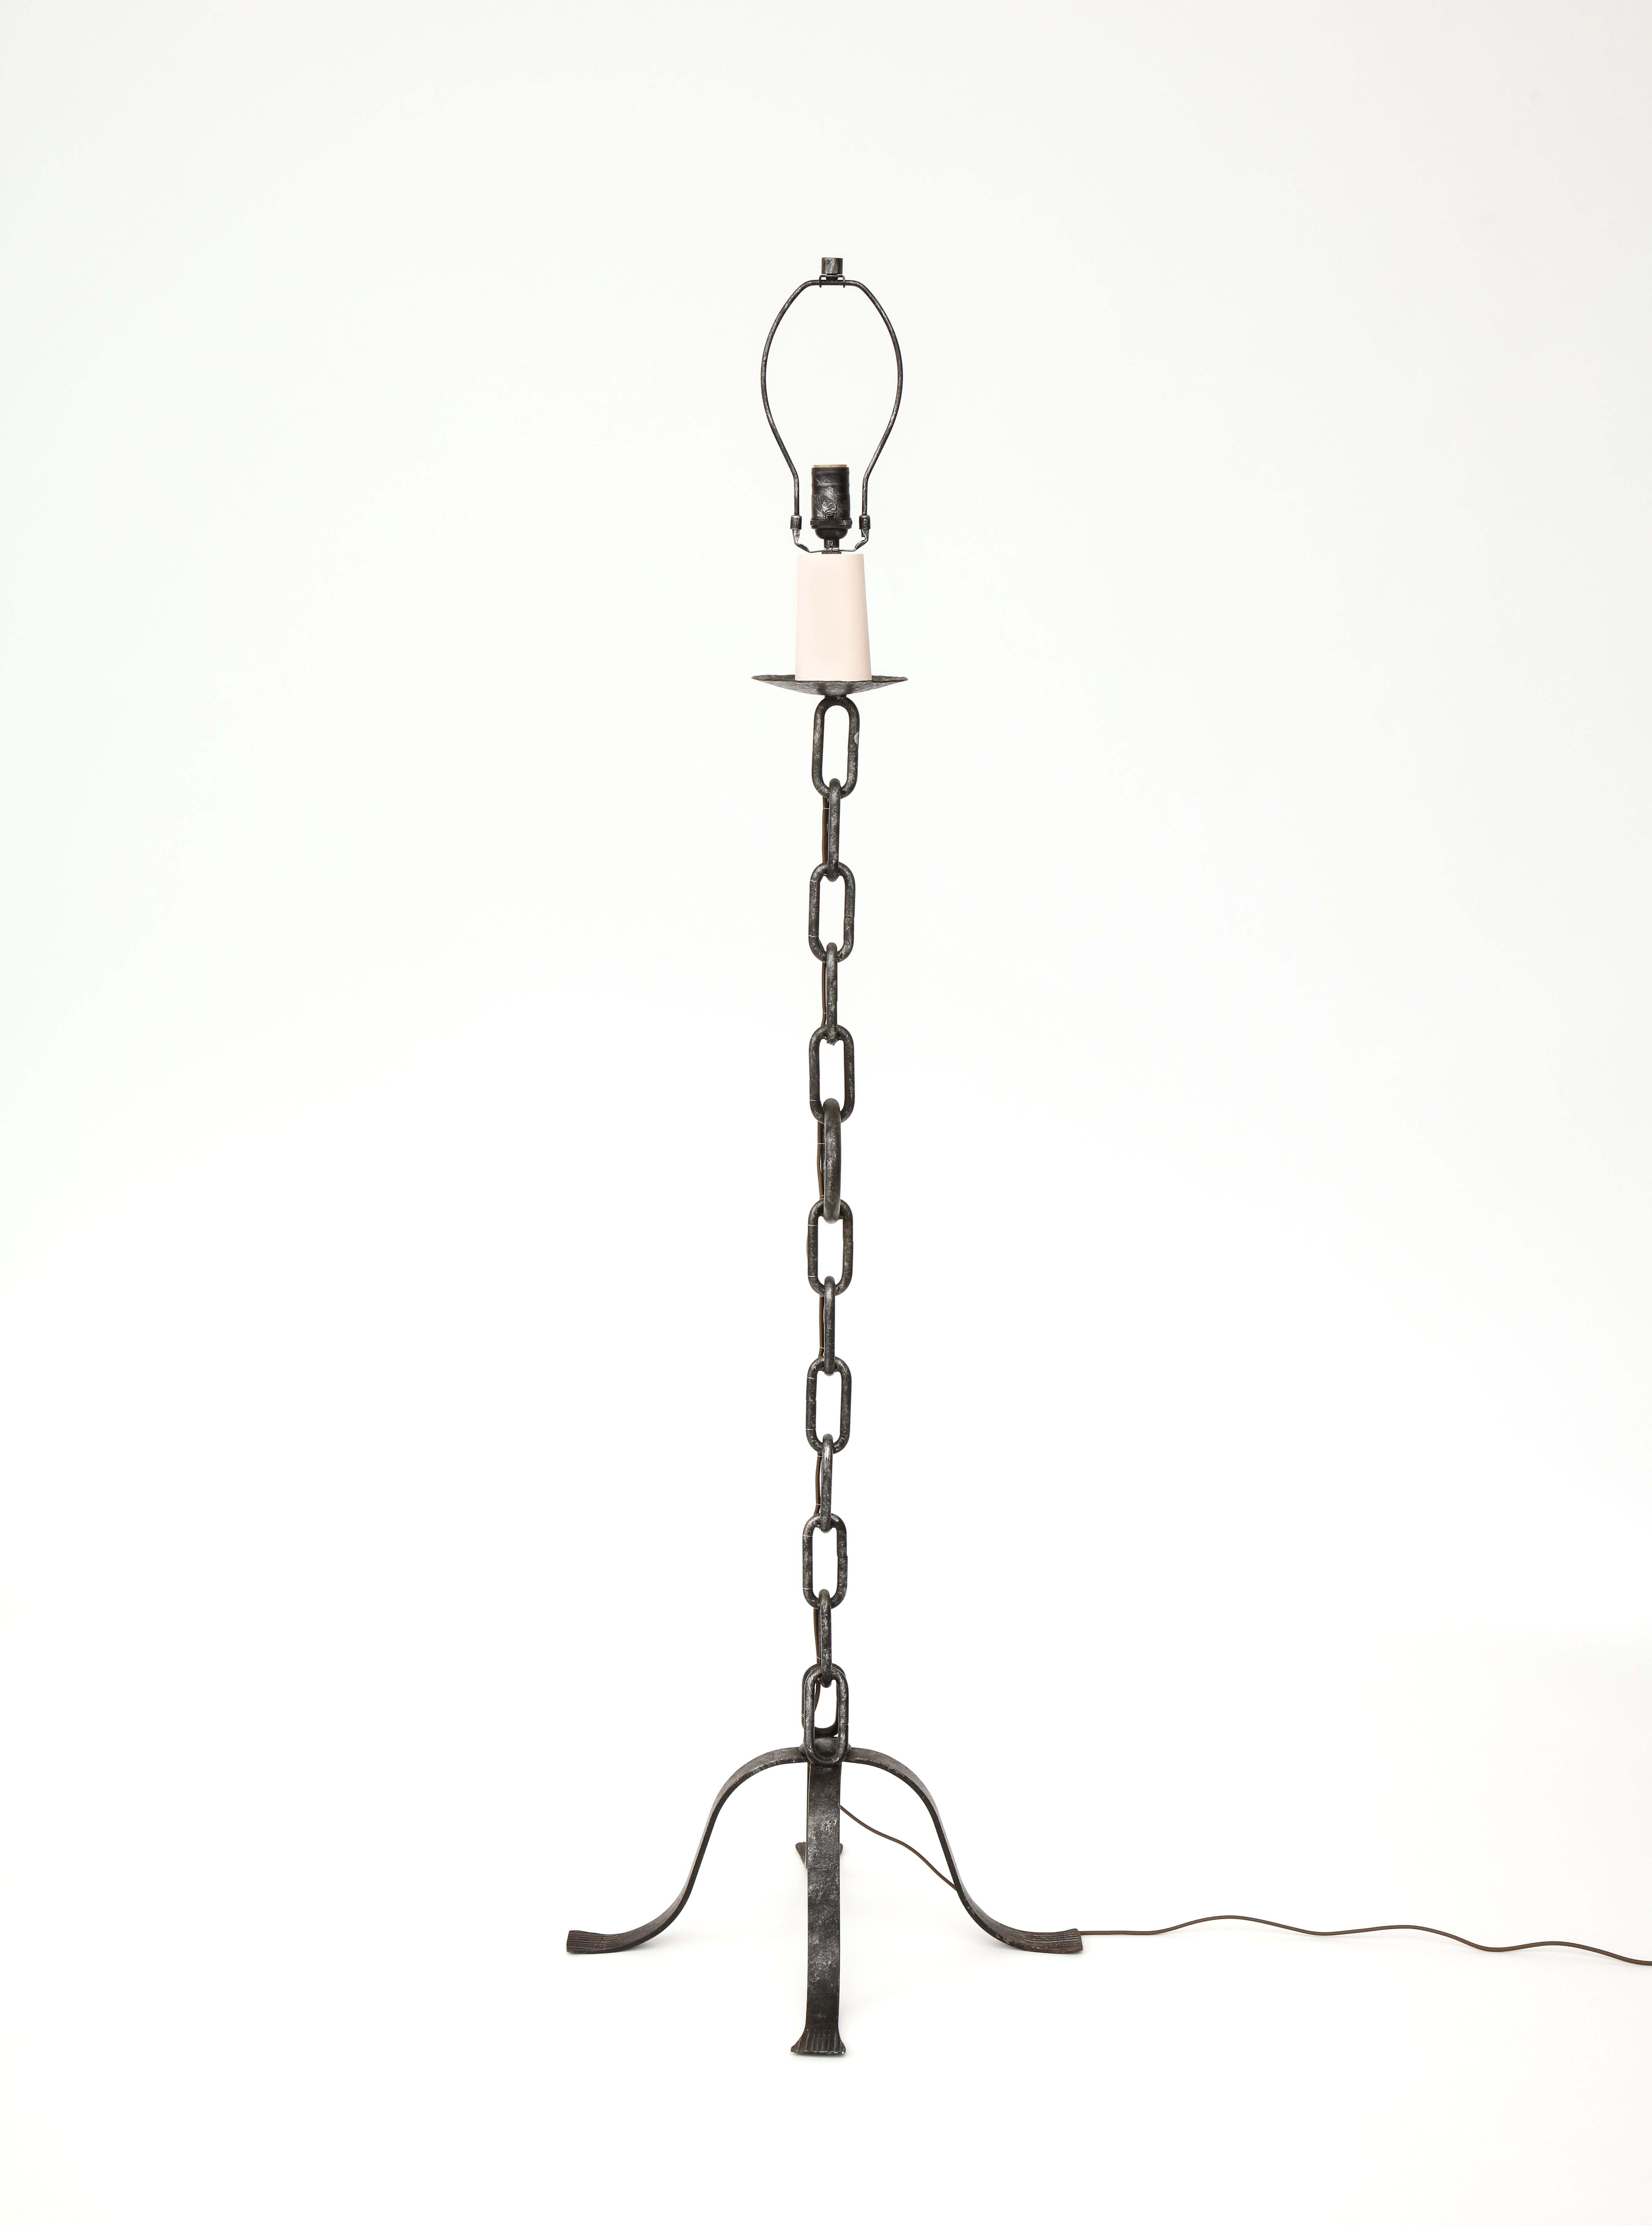 Hand-Crafted Wrought Iron Floor Lamps, Spain 1940's For Sale